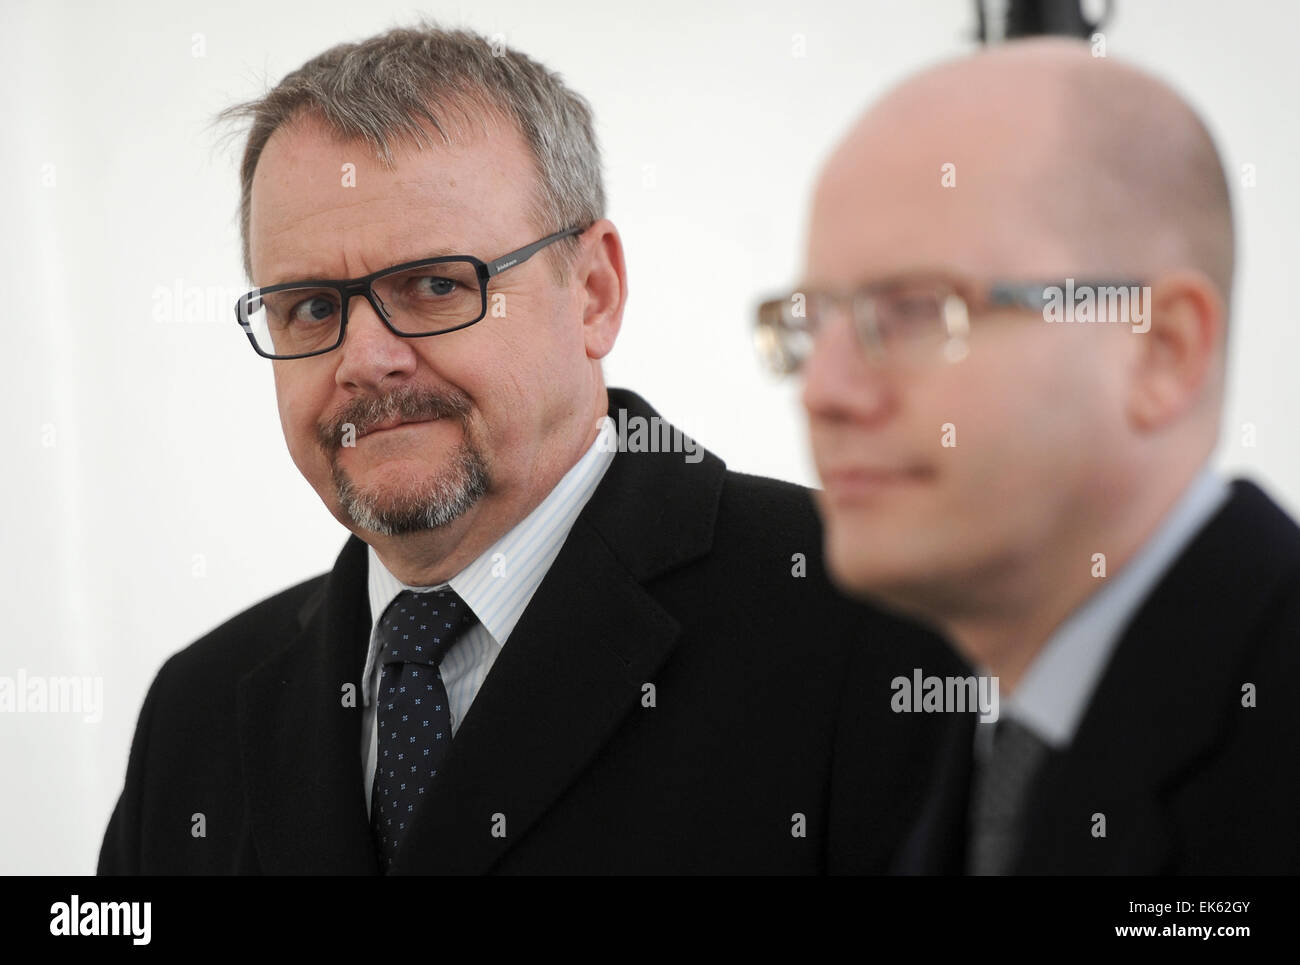 Czech Minister of Transport Dan Tok (left) and Prime Minister Bohuslav Sobotka speak to journalist during the symbolical ceremony start of the construction of further two sections of motorway D3 in Veseli nad Luznici, Czech Republic, April 4, 2015. Motorway will connect Prague with Ceske Budejovice in section Veseli nad Luznici to Bosilec and from Borek to Usilne. (CTK Photo/Vaclav Pancer) Stock Photo